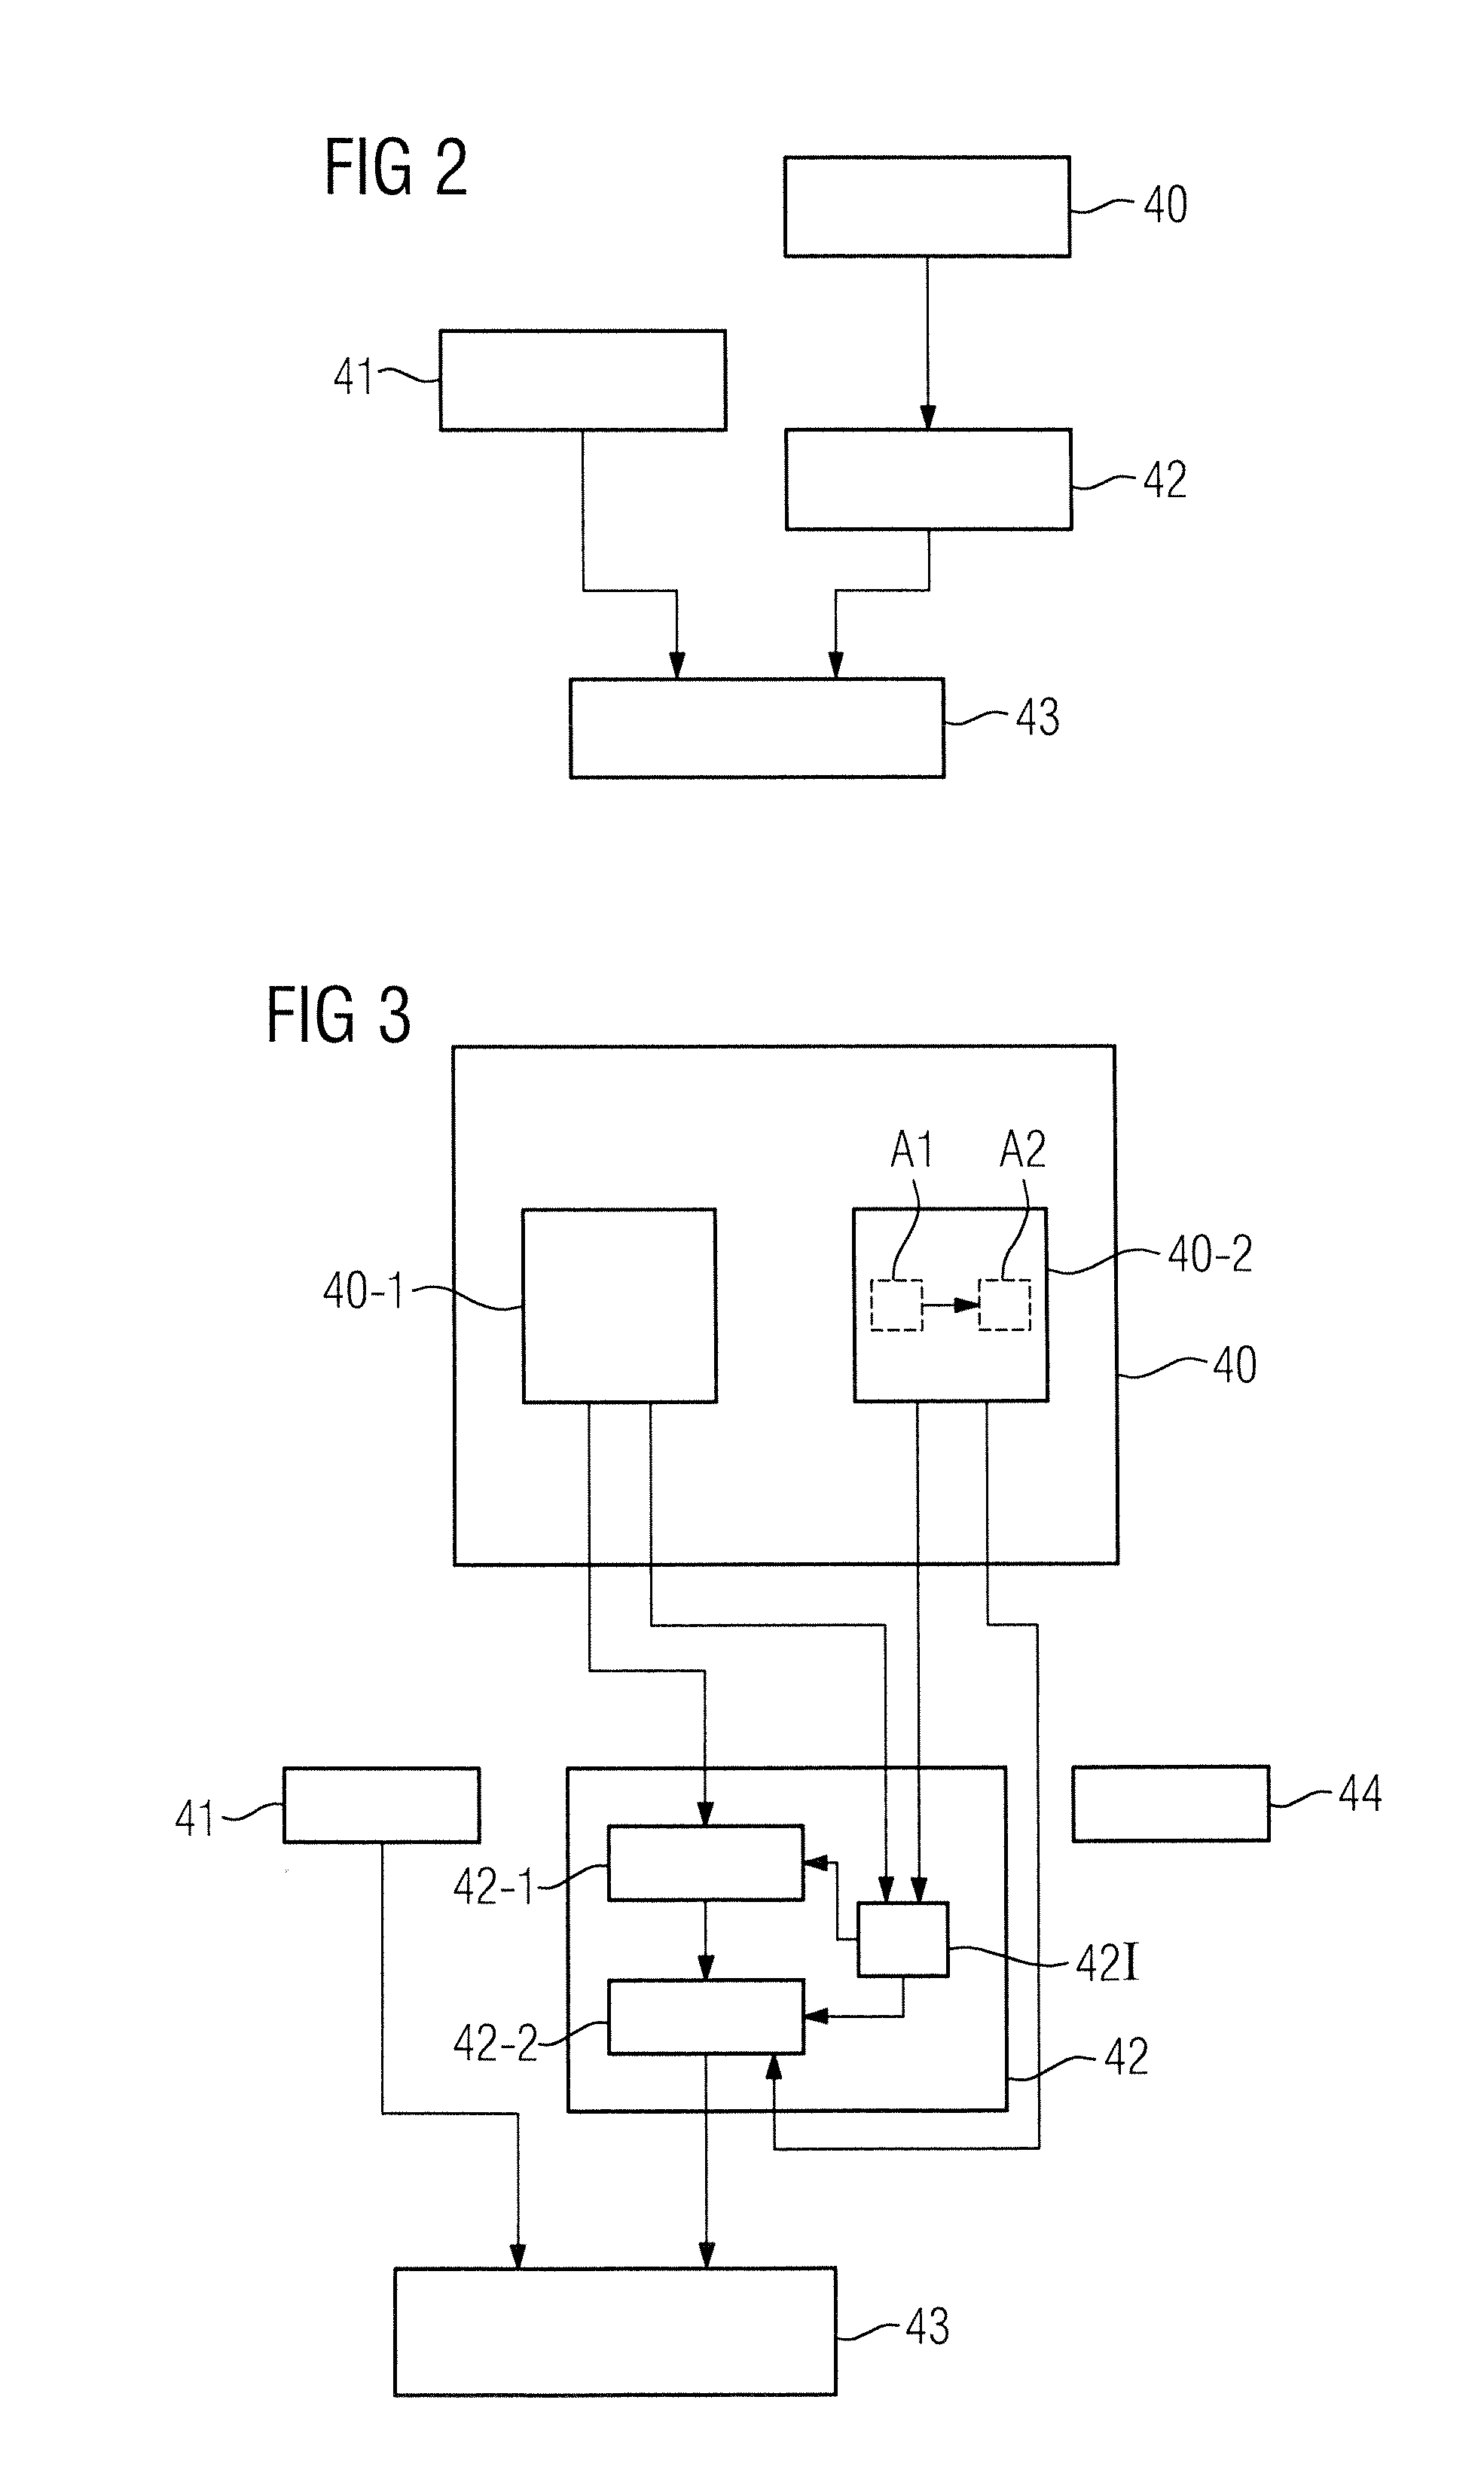 Method and apparatus for attenuation correction of emission tomography scan data